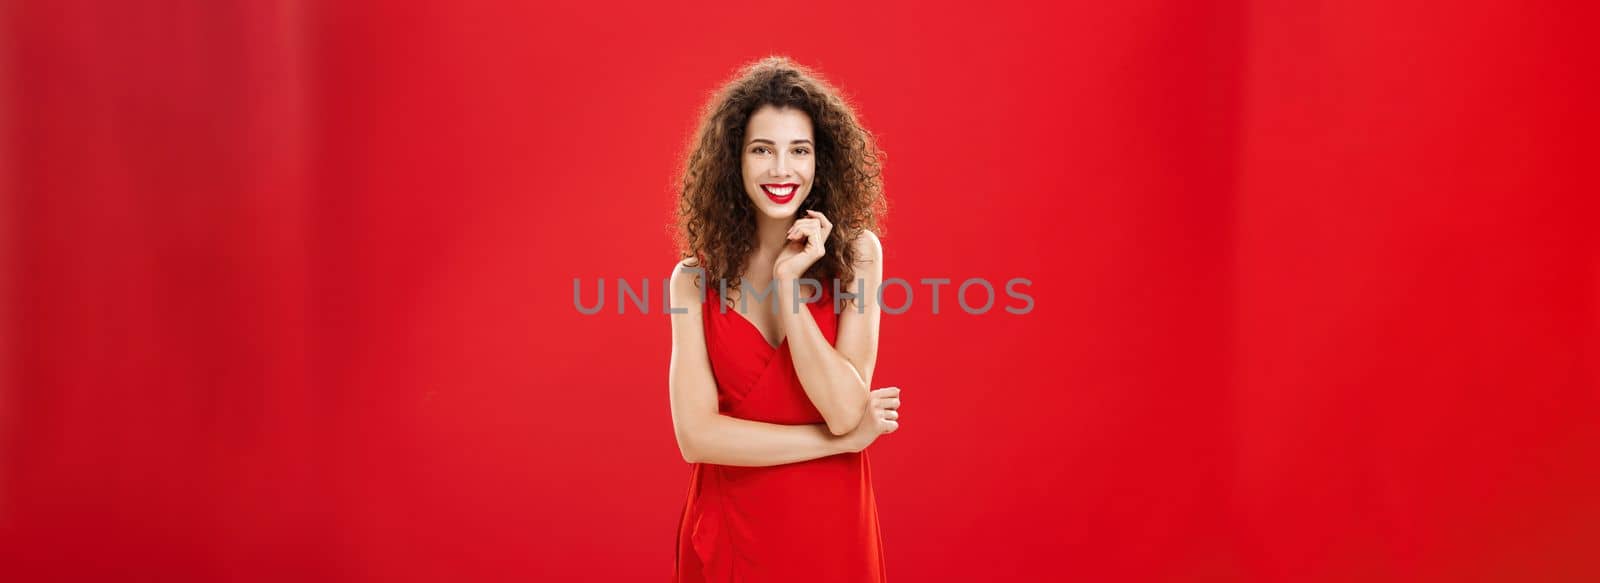 Passionate charming european woman over red background in elegant dress with curly hairstyle smiling cute, feminine playing with hair strand standing timid and silly, talking to person she admires.